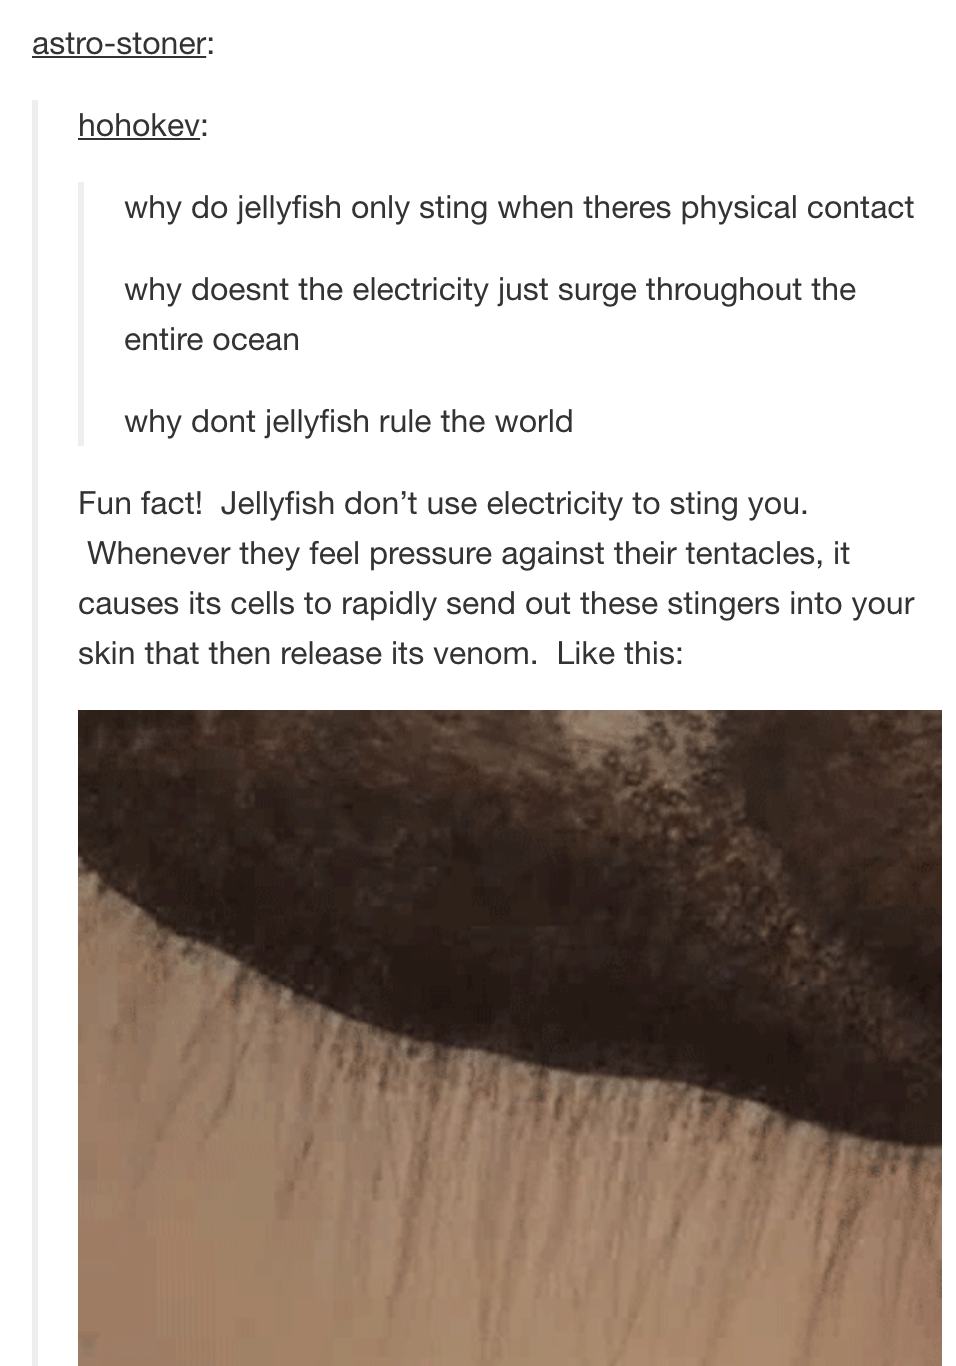 ocean tumblr posts - astrostoner hohokev why do jellyfish only sting when theres physical contact why doesnt the electricity just surge throughout the entire ocean why dont jellyfish rule the world Fun fact! Jellyfish don't use electricity to sting you. W